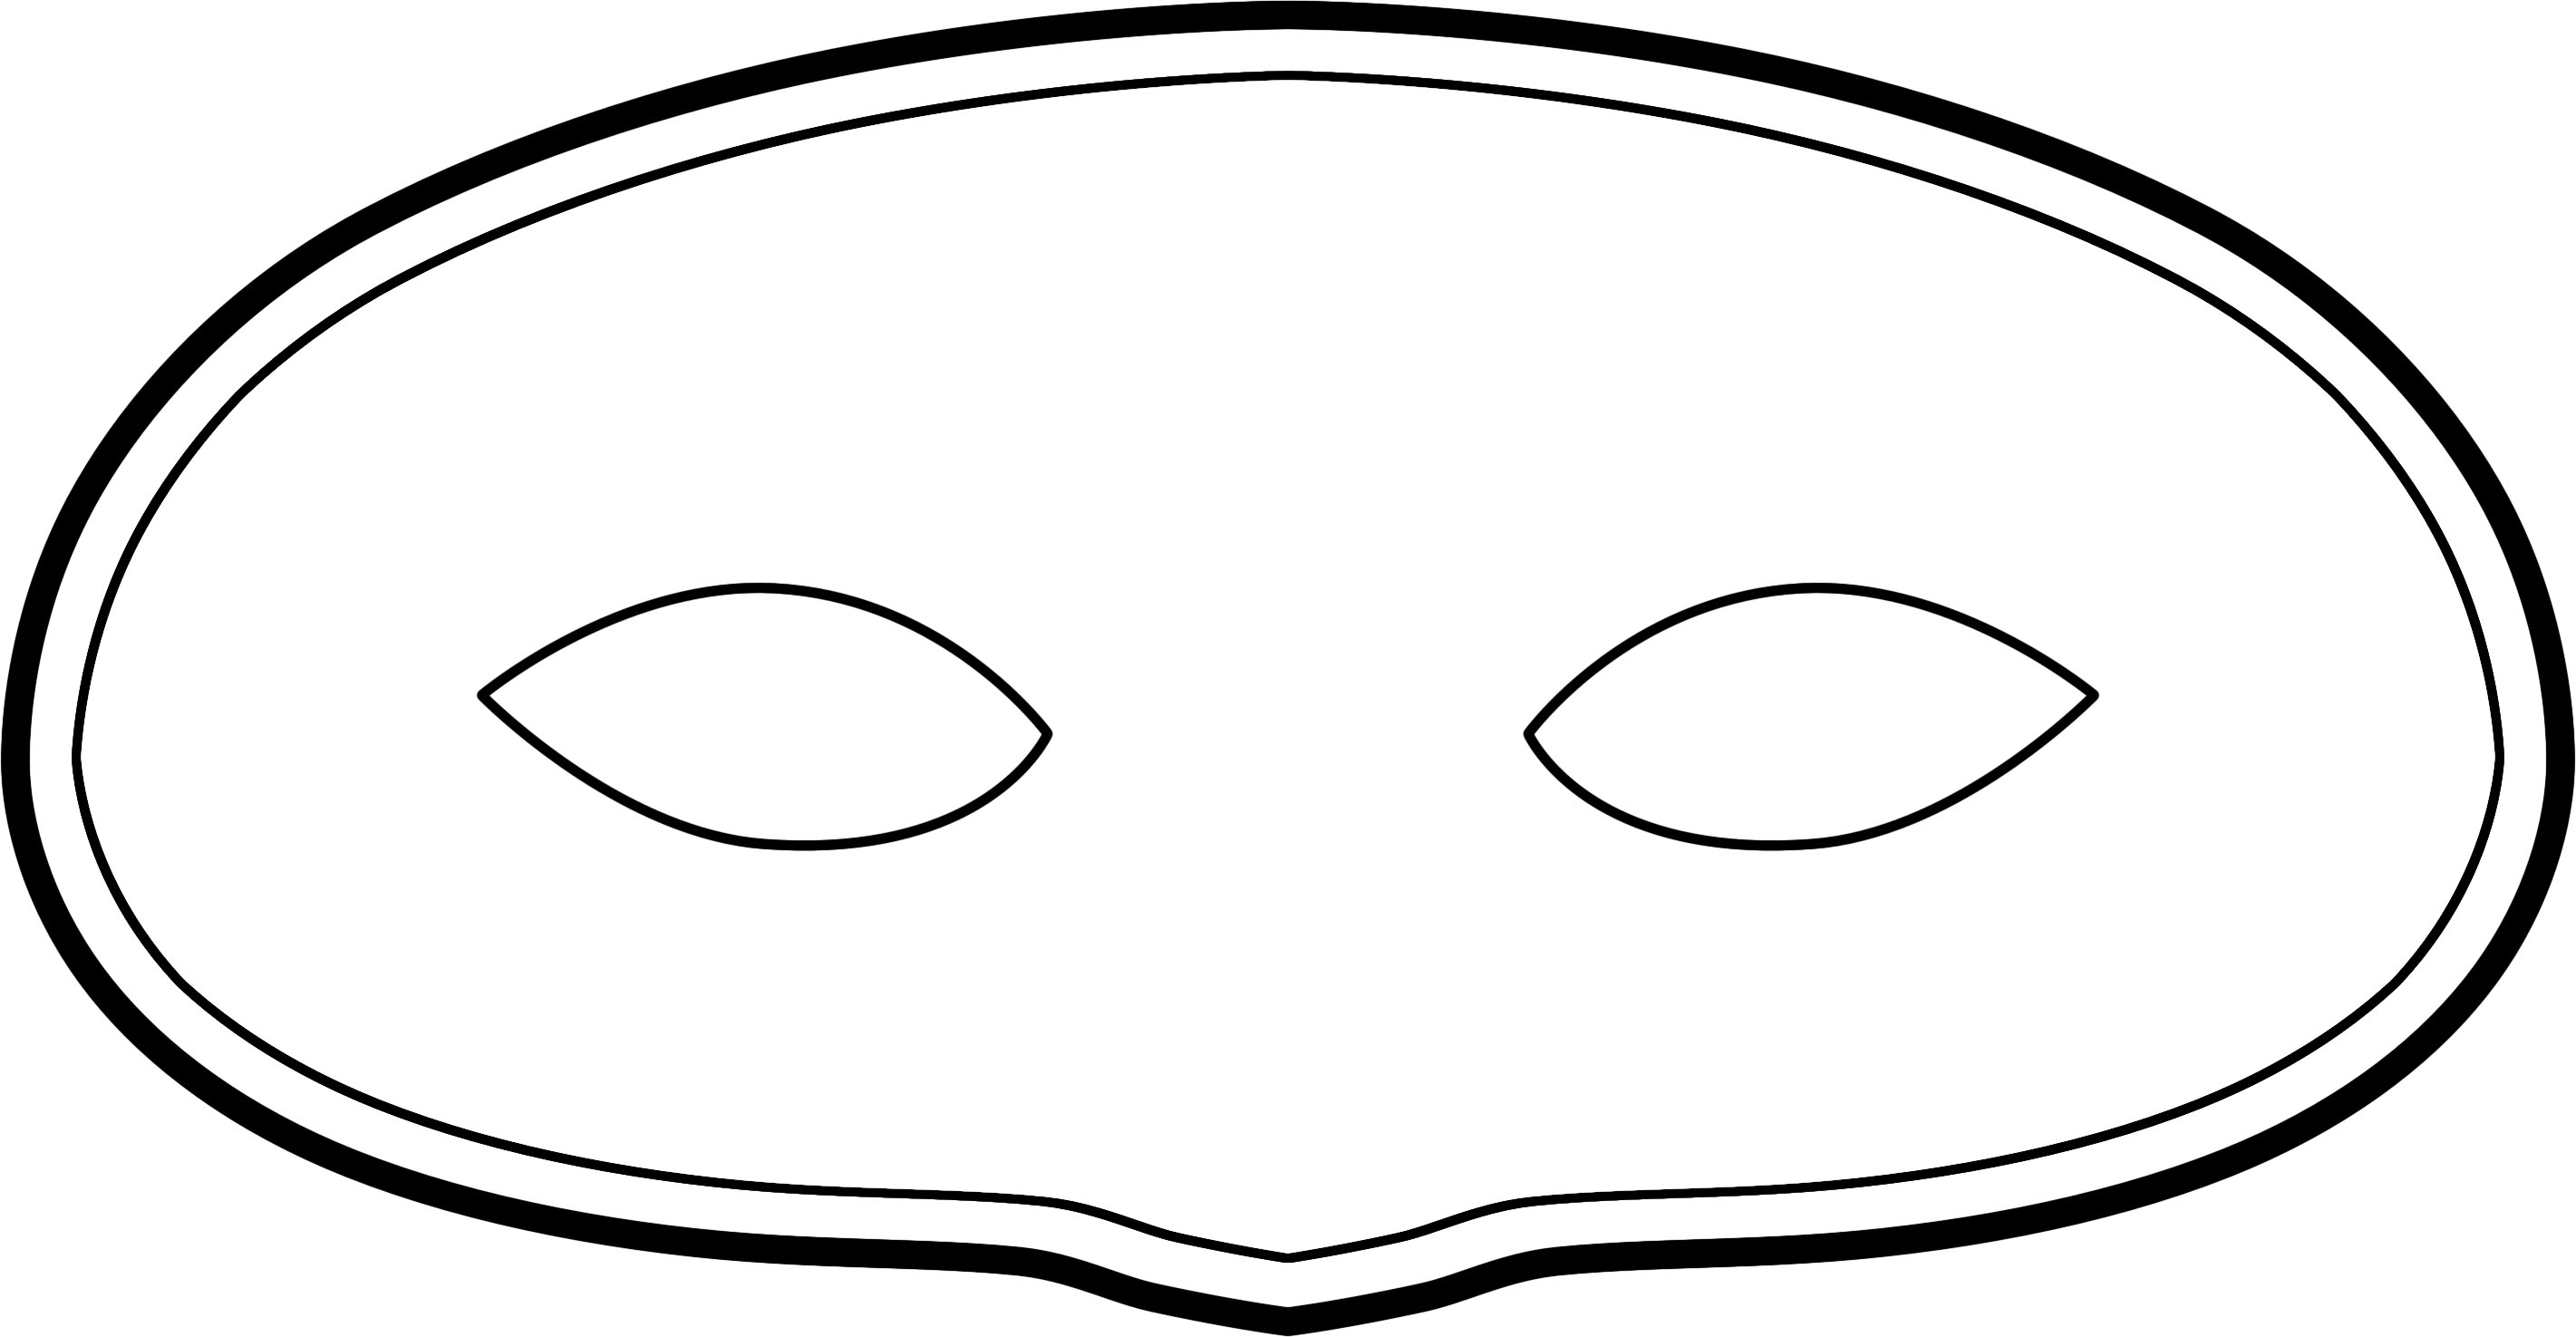 Plain Mask To Print And Decorate Coloring Page